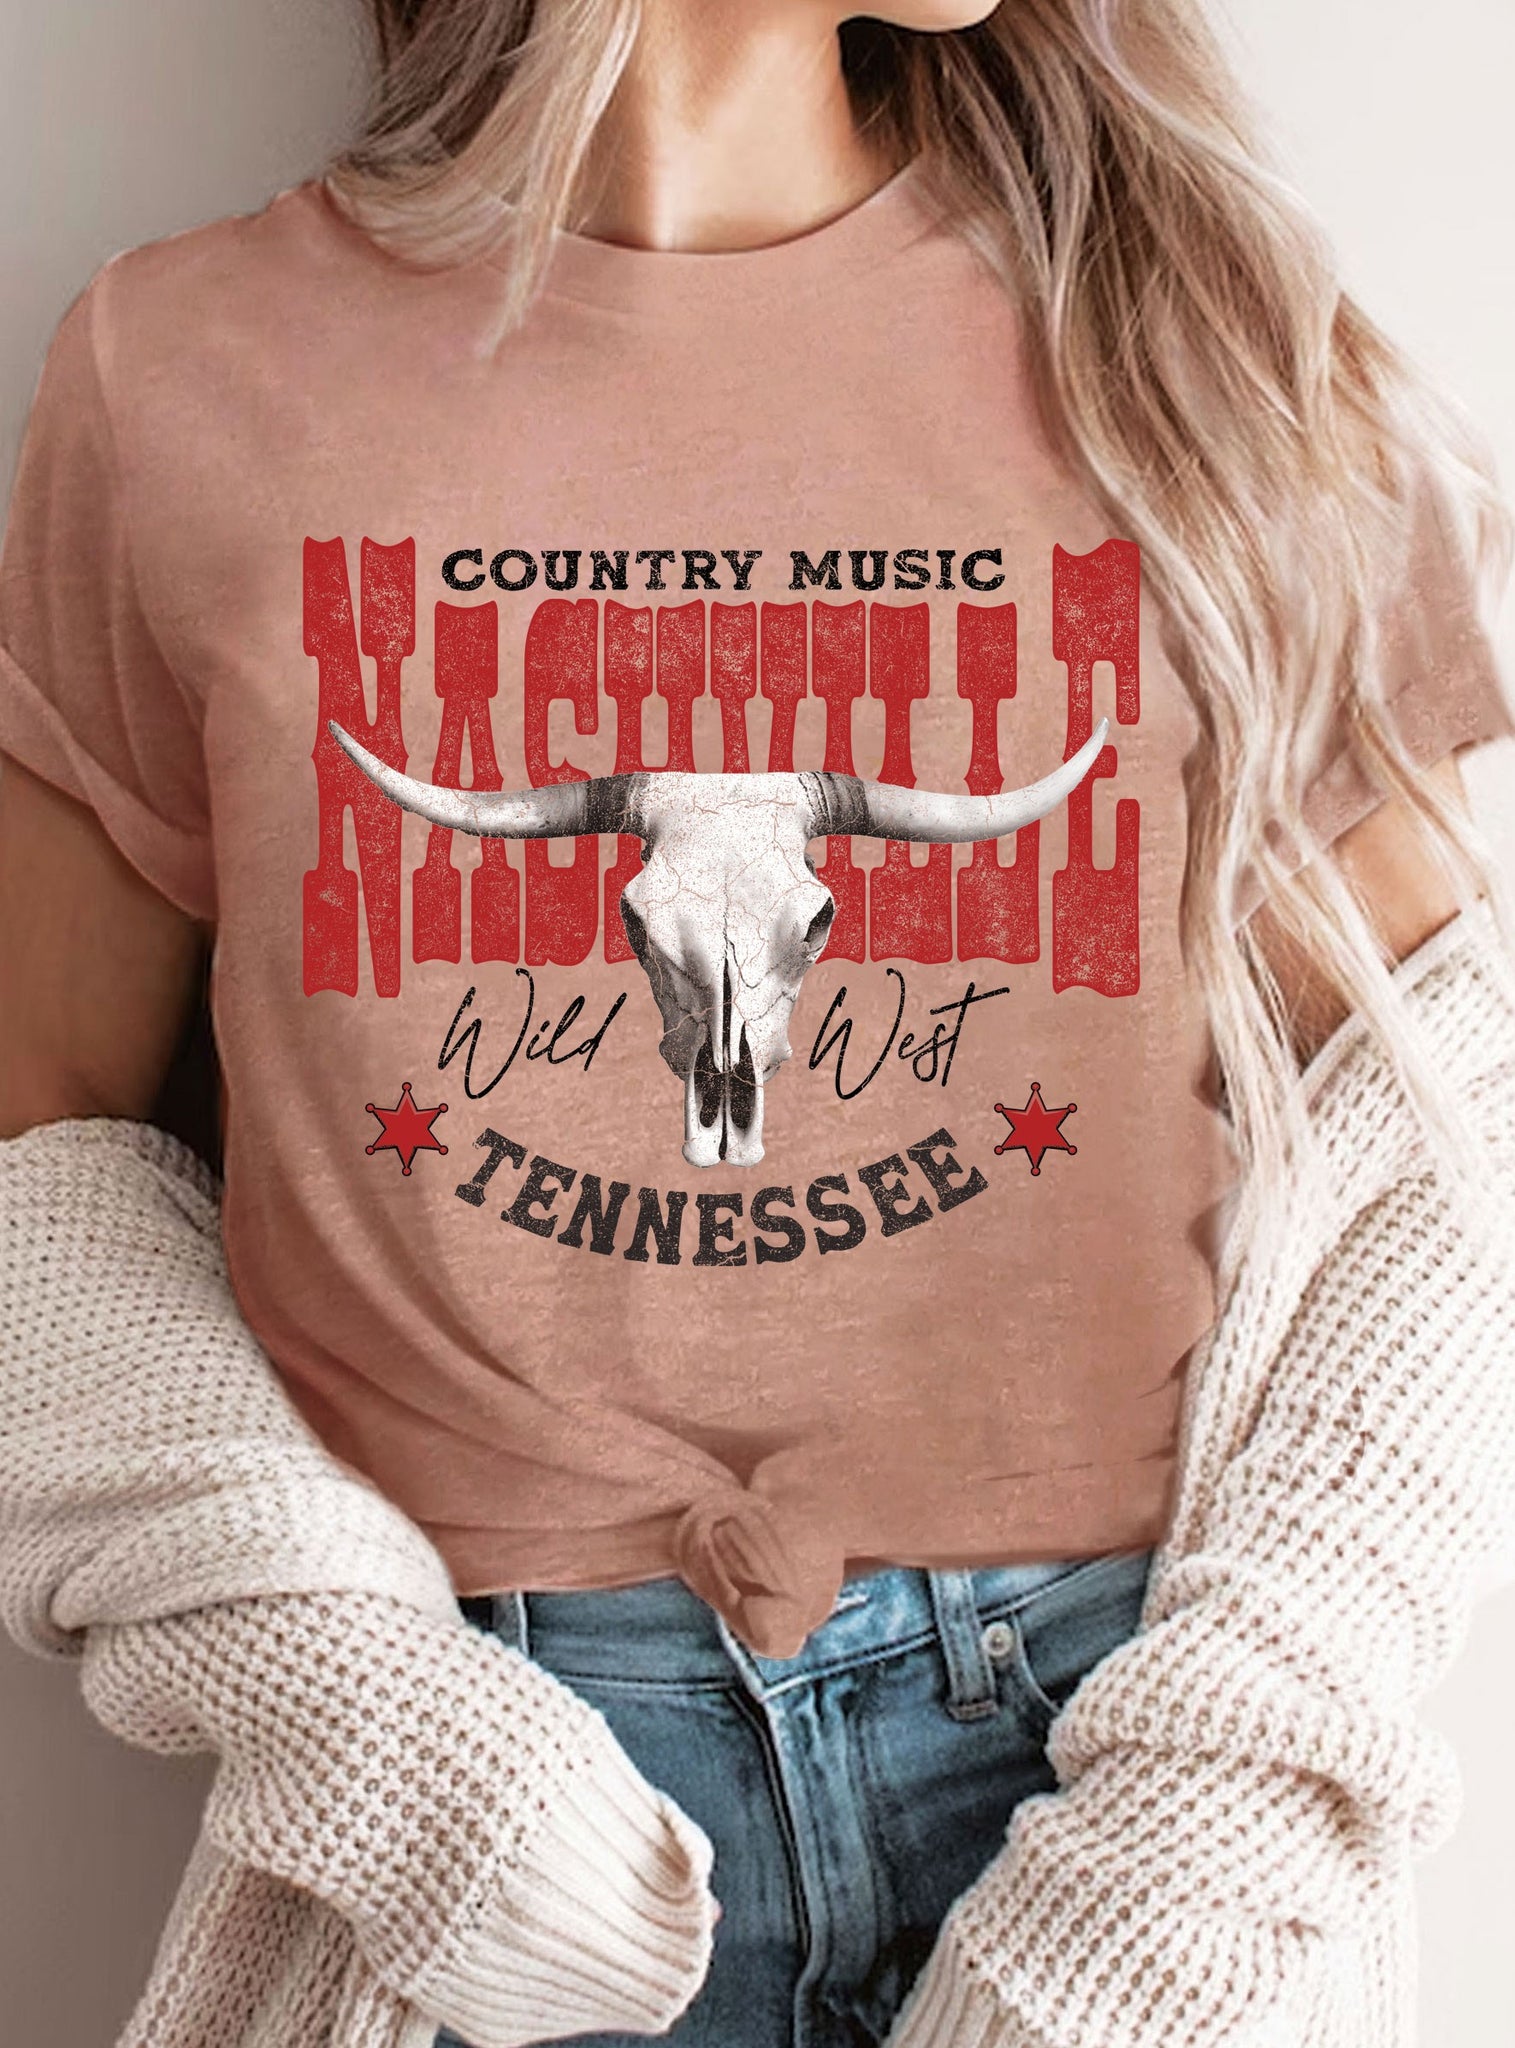 NASHVILLE COUNTRY MUSIC